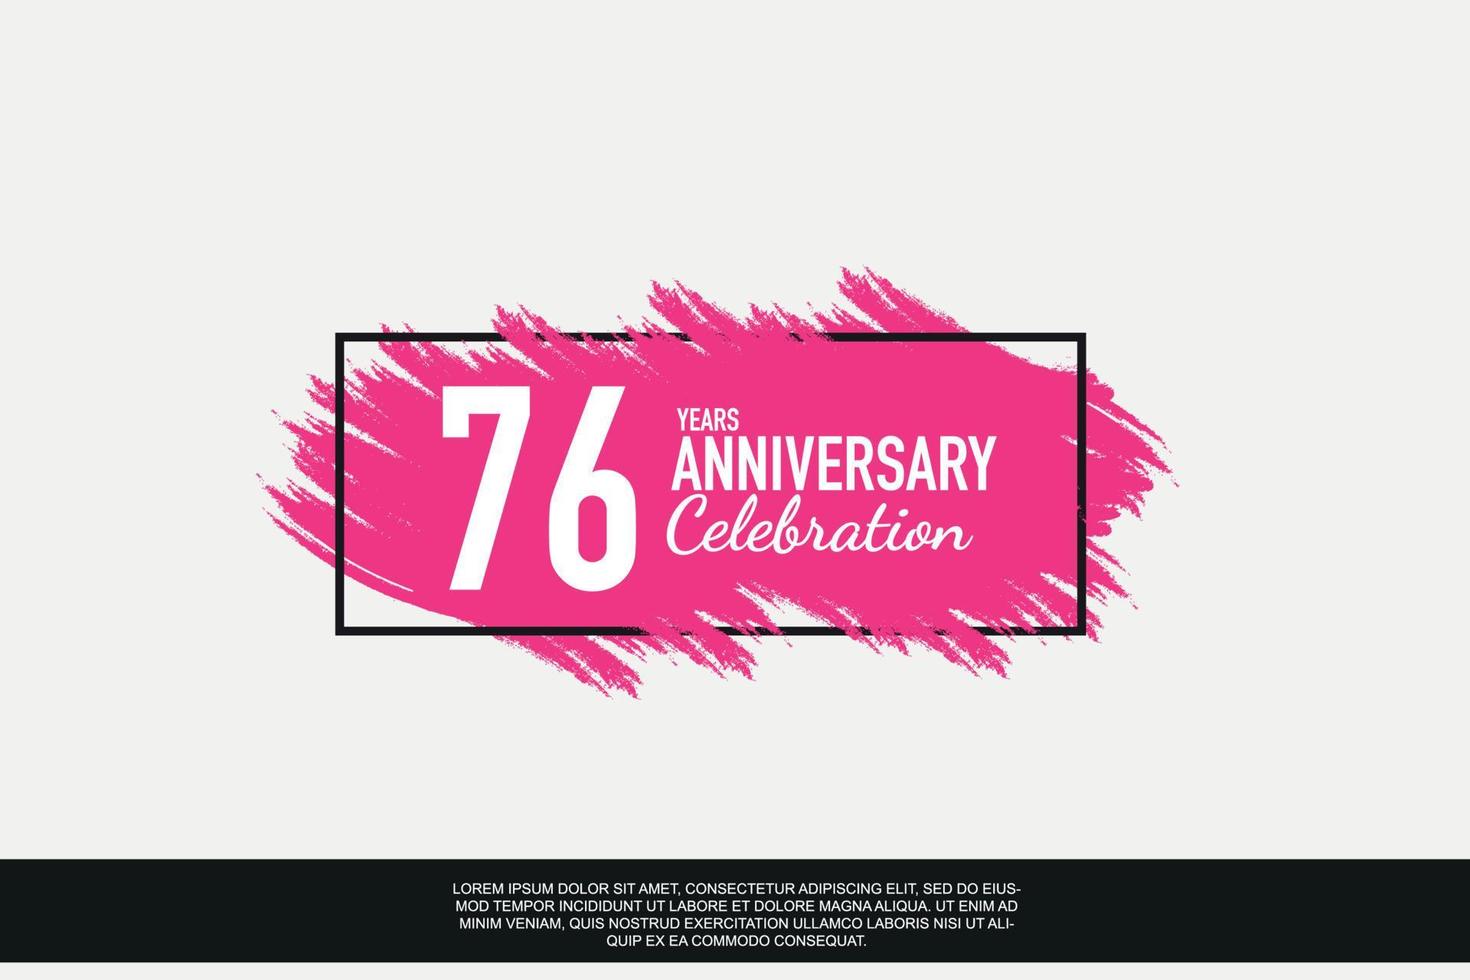 76 year anniversary celebration vector pink design in black frame on white background abstract illustration logo